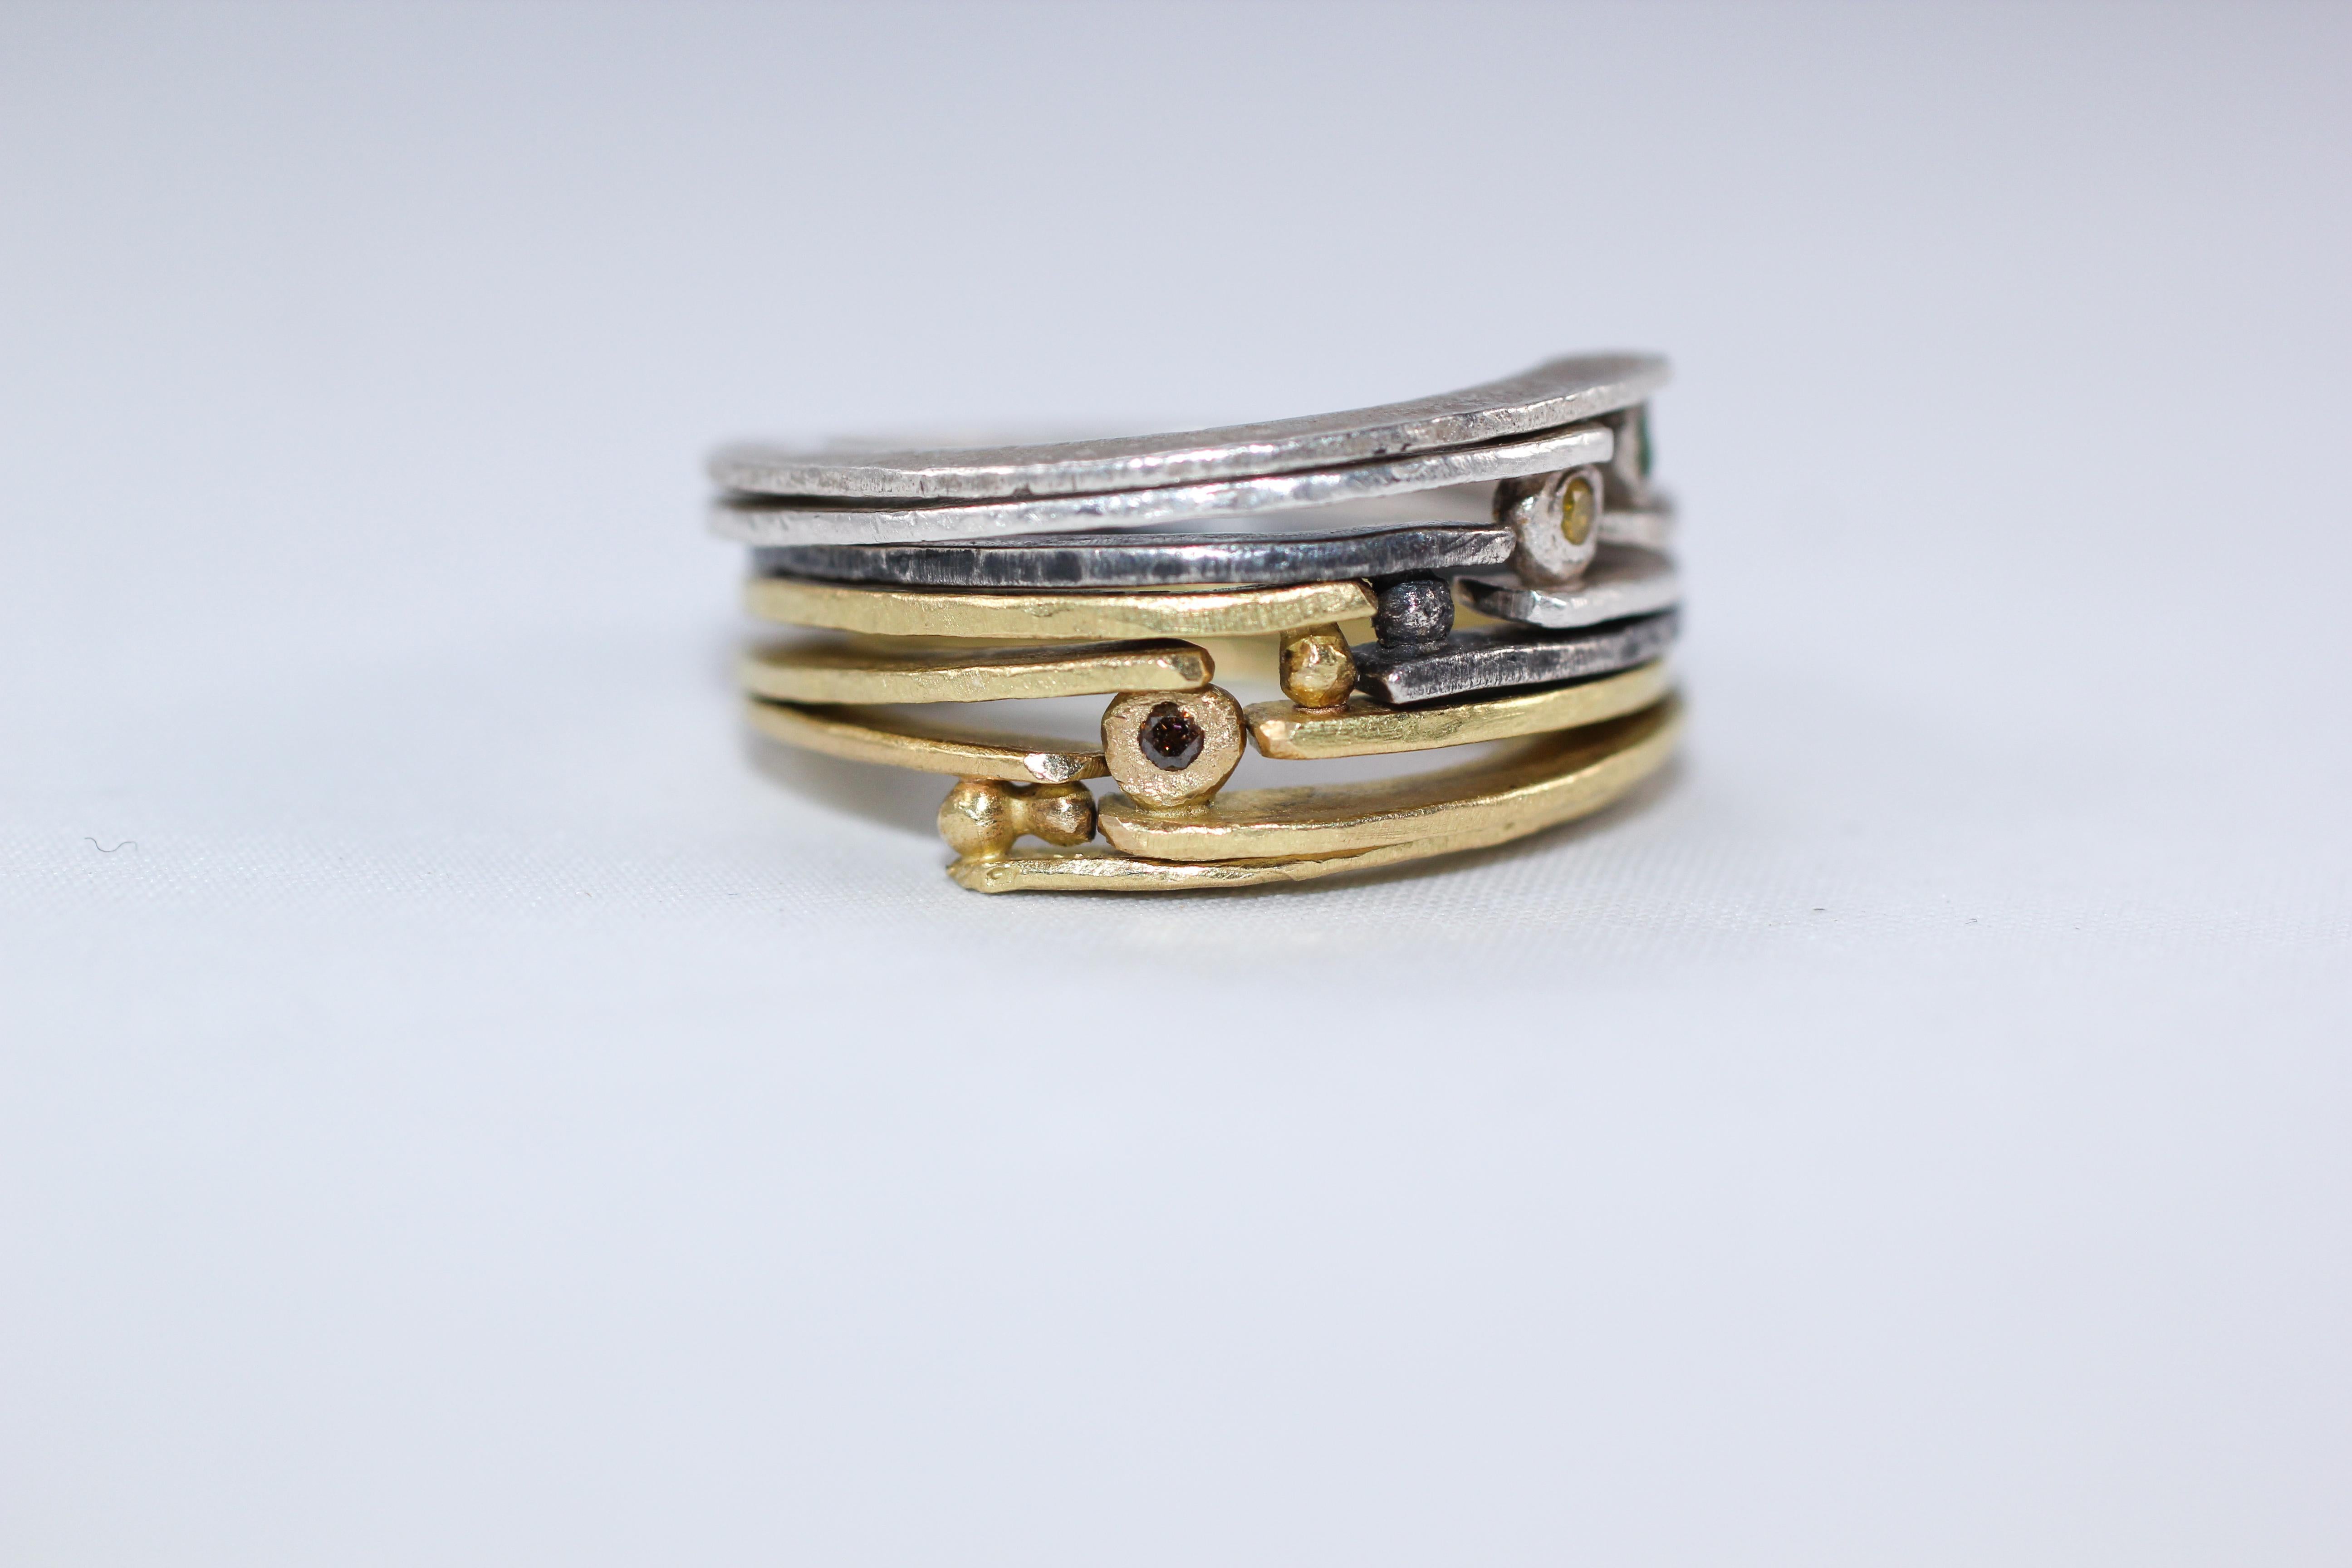 A set of six 18K gold and sterling silver fashion band rings highlighted with yellow and brown diamonds. Simplicity With A Twist design, a combination of three 18K gold and three sterling silver rings. This unisex combination would make an